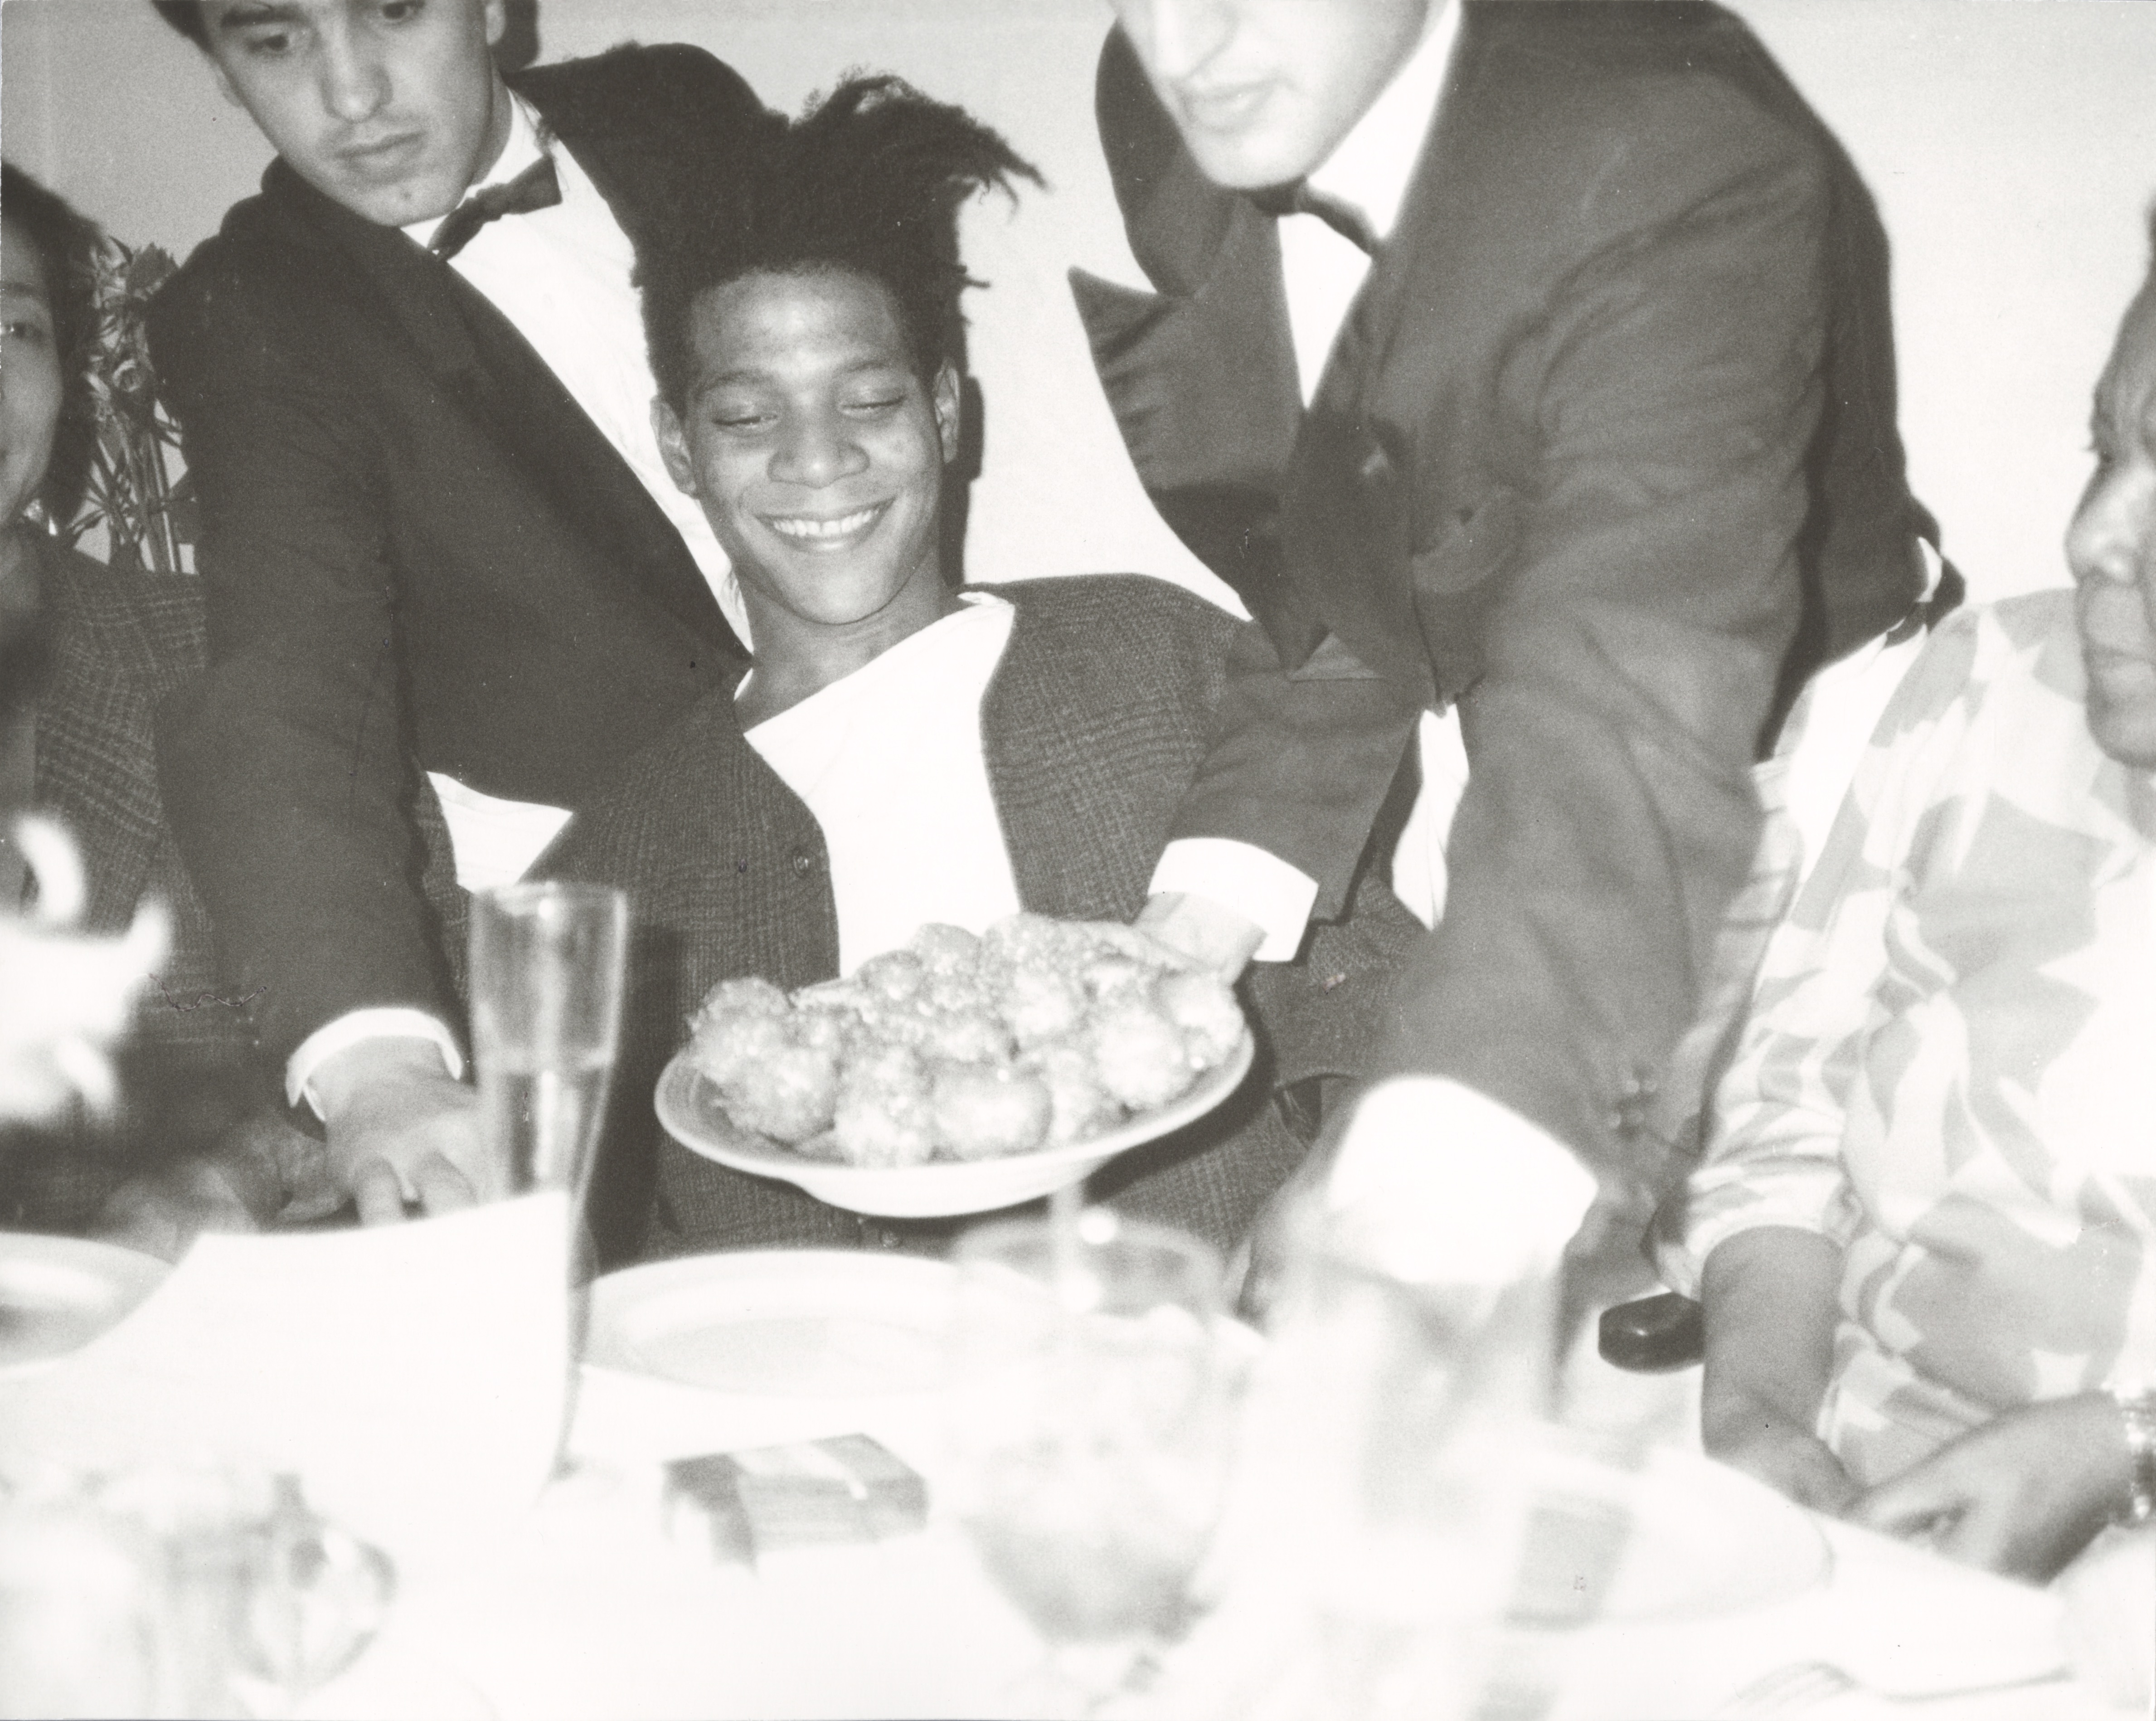 Jean-Michel Basquiat Dinner at Mr. Chow, 1985 unique gelatin silver print © The Andy Warhol Foundation for the Visual Arts, Inc. Licensed by Artists Rights Society (ARS), New York.